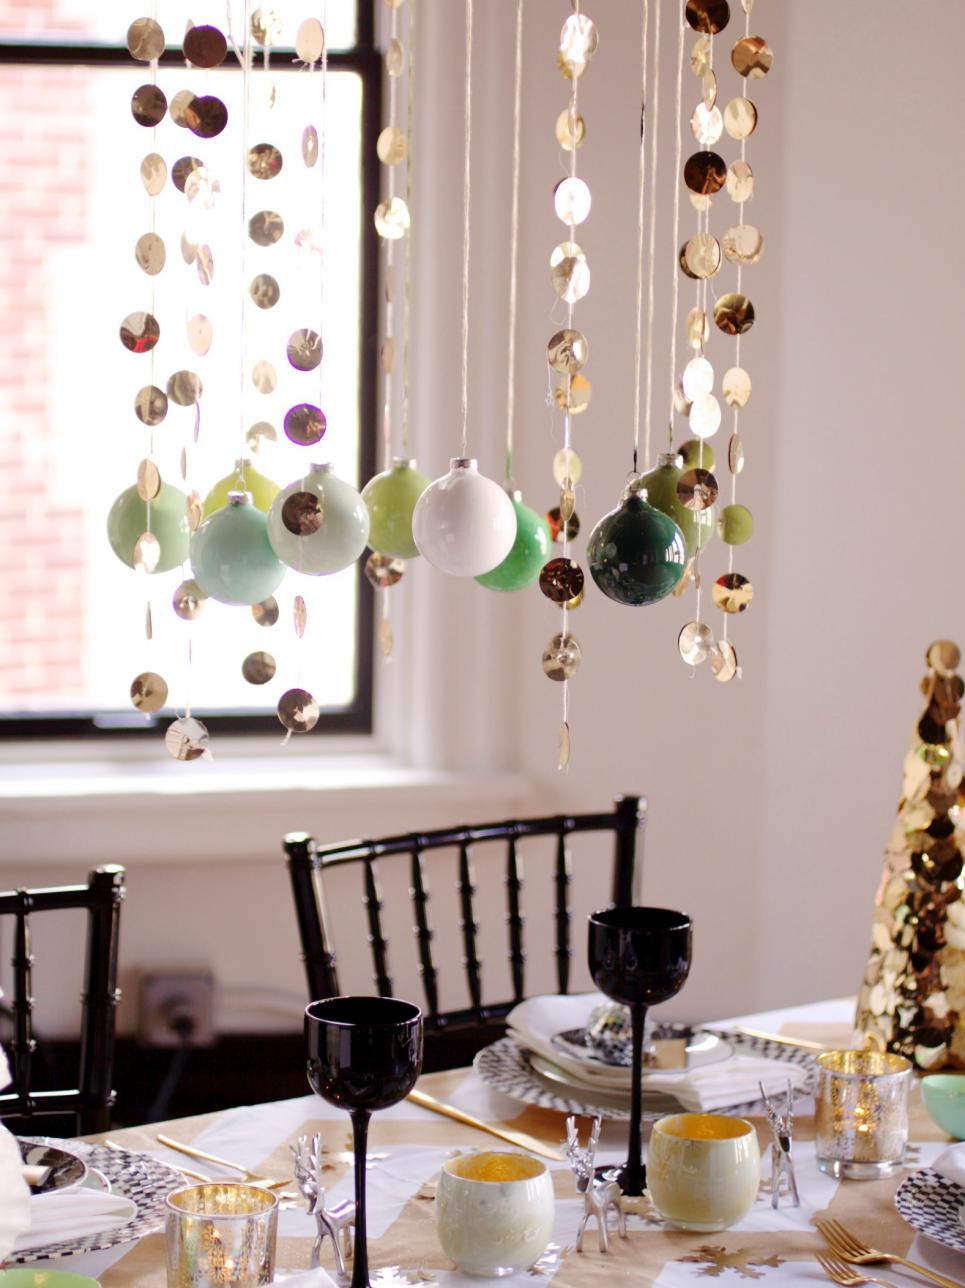 DIY Christmas Centerpieces
 Decorate The Tables With These 50 DIY Christmas Centerpieces